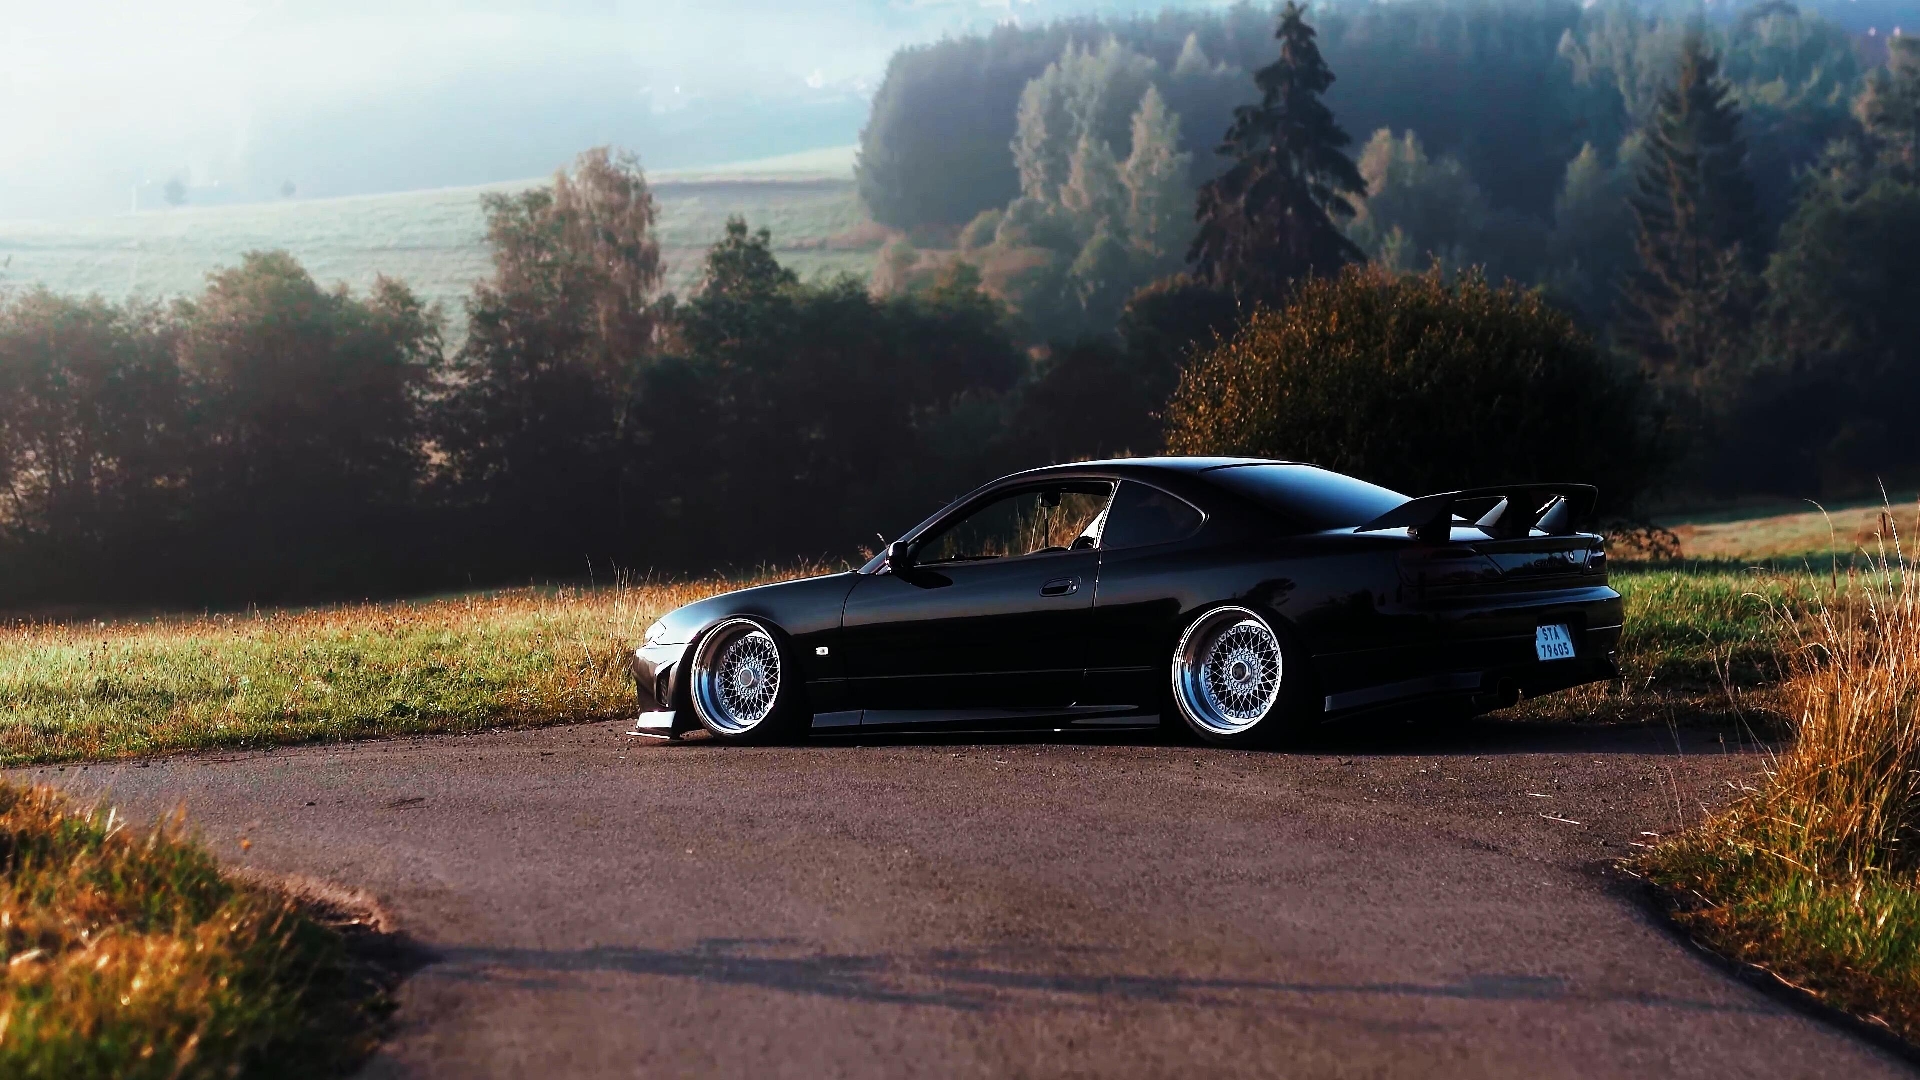 General 1920x1080 Nissan Silvia S15 Japanese cars car Nissan low car side view trees stanced